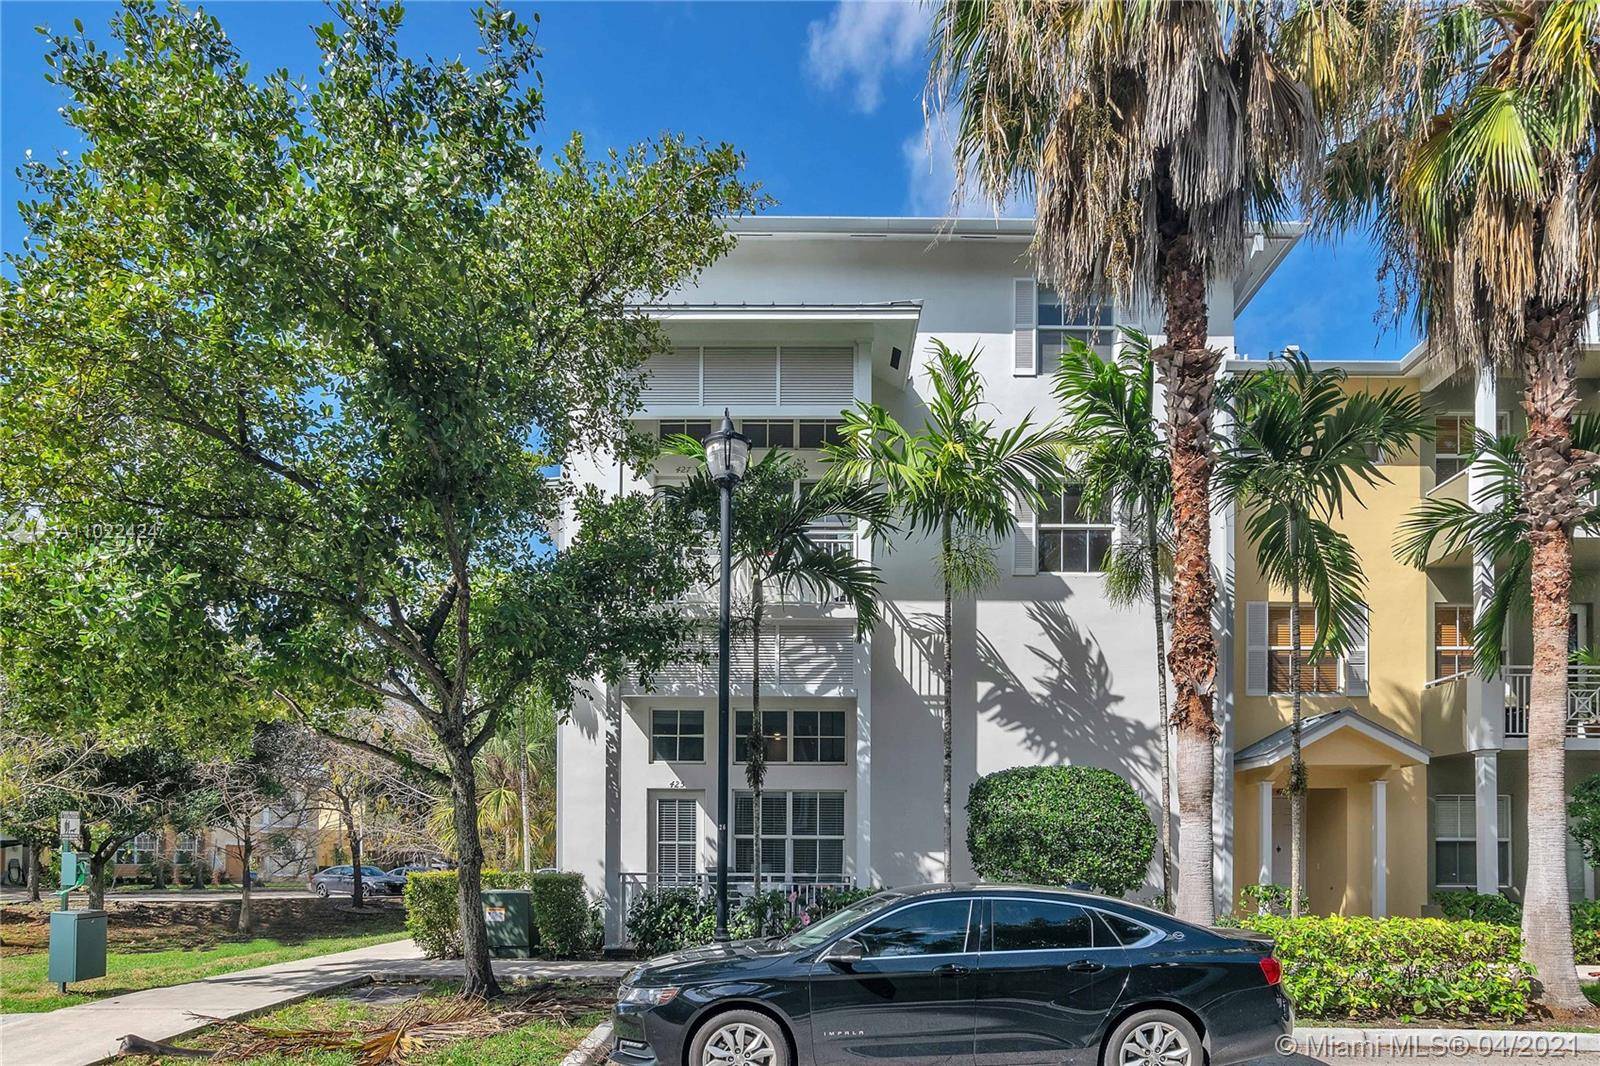 Recently remodeled 3 2, spacious, 1921 sqf, bright, open concept townhome with ultra high ceilings in the heart of Historic Sailboat Bend, Fort Lauderdale.